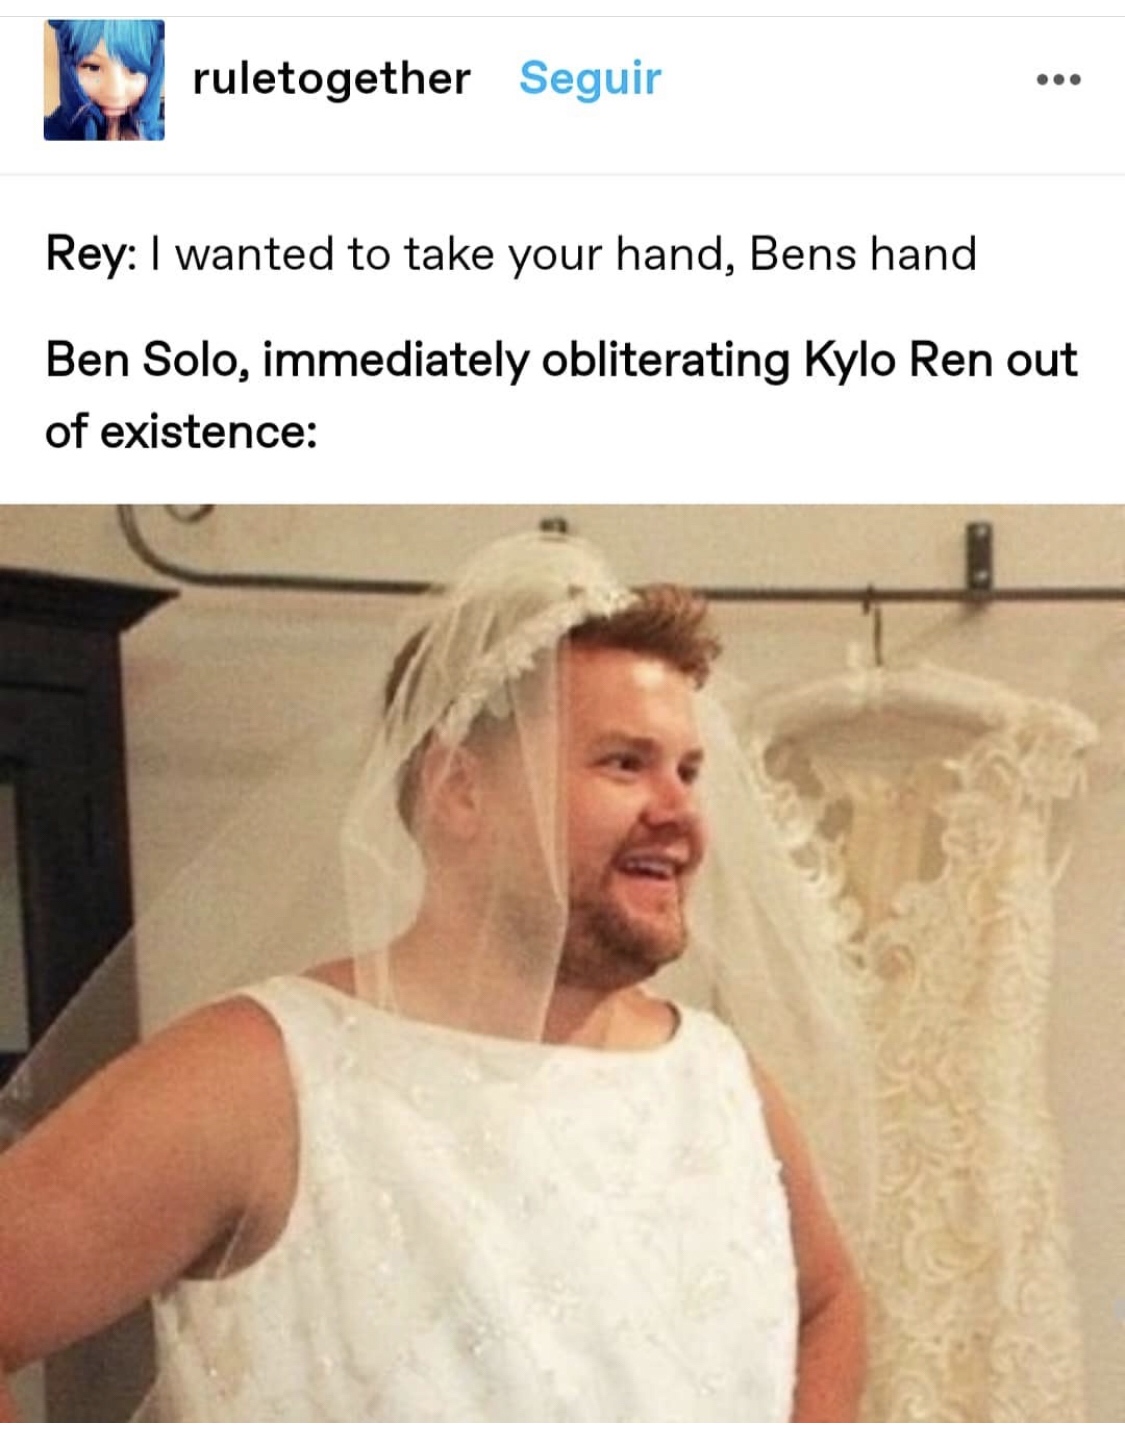 wedding dress reaction meme - ruletogether Seguir Rey I wanted to take your hand, Bens hand Ben Solo, immediately obliterating Kylo Ren out of existence